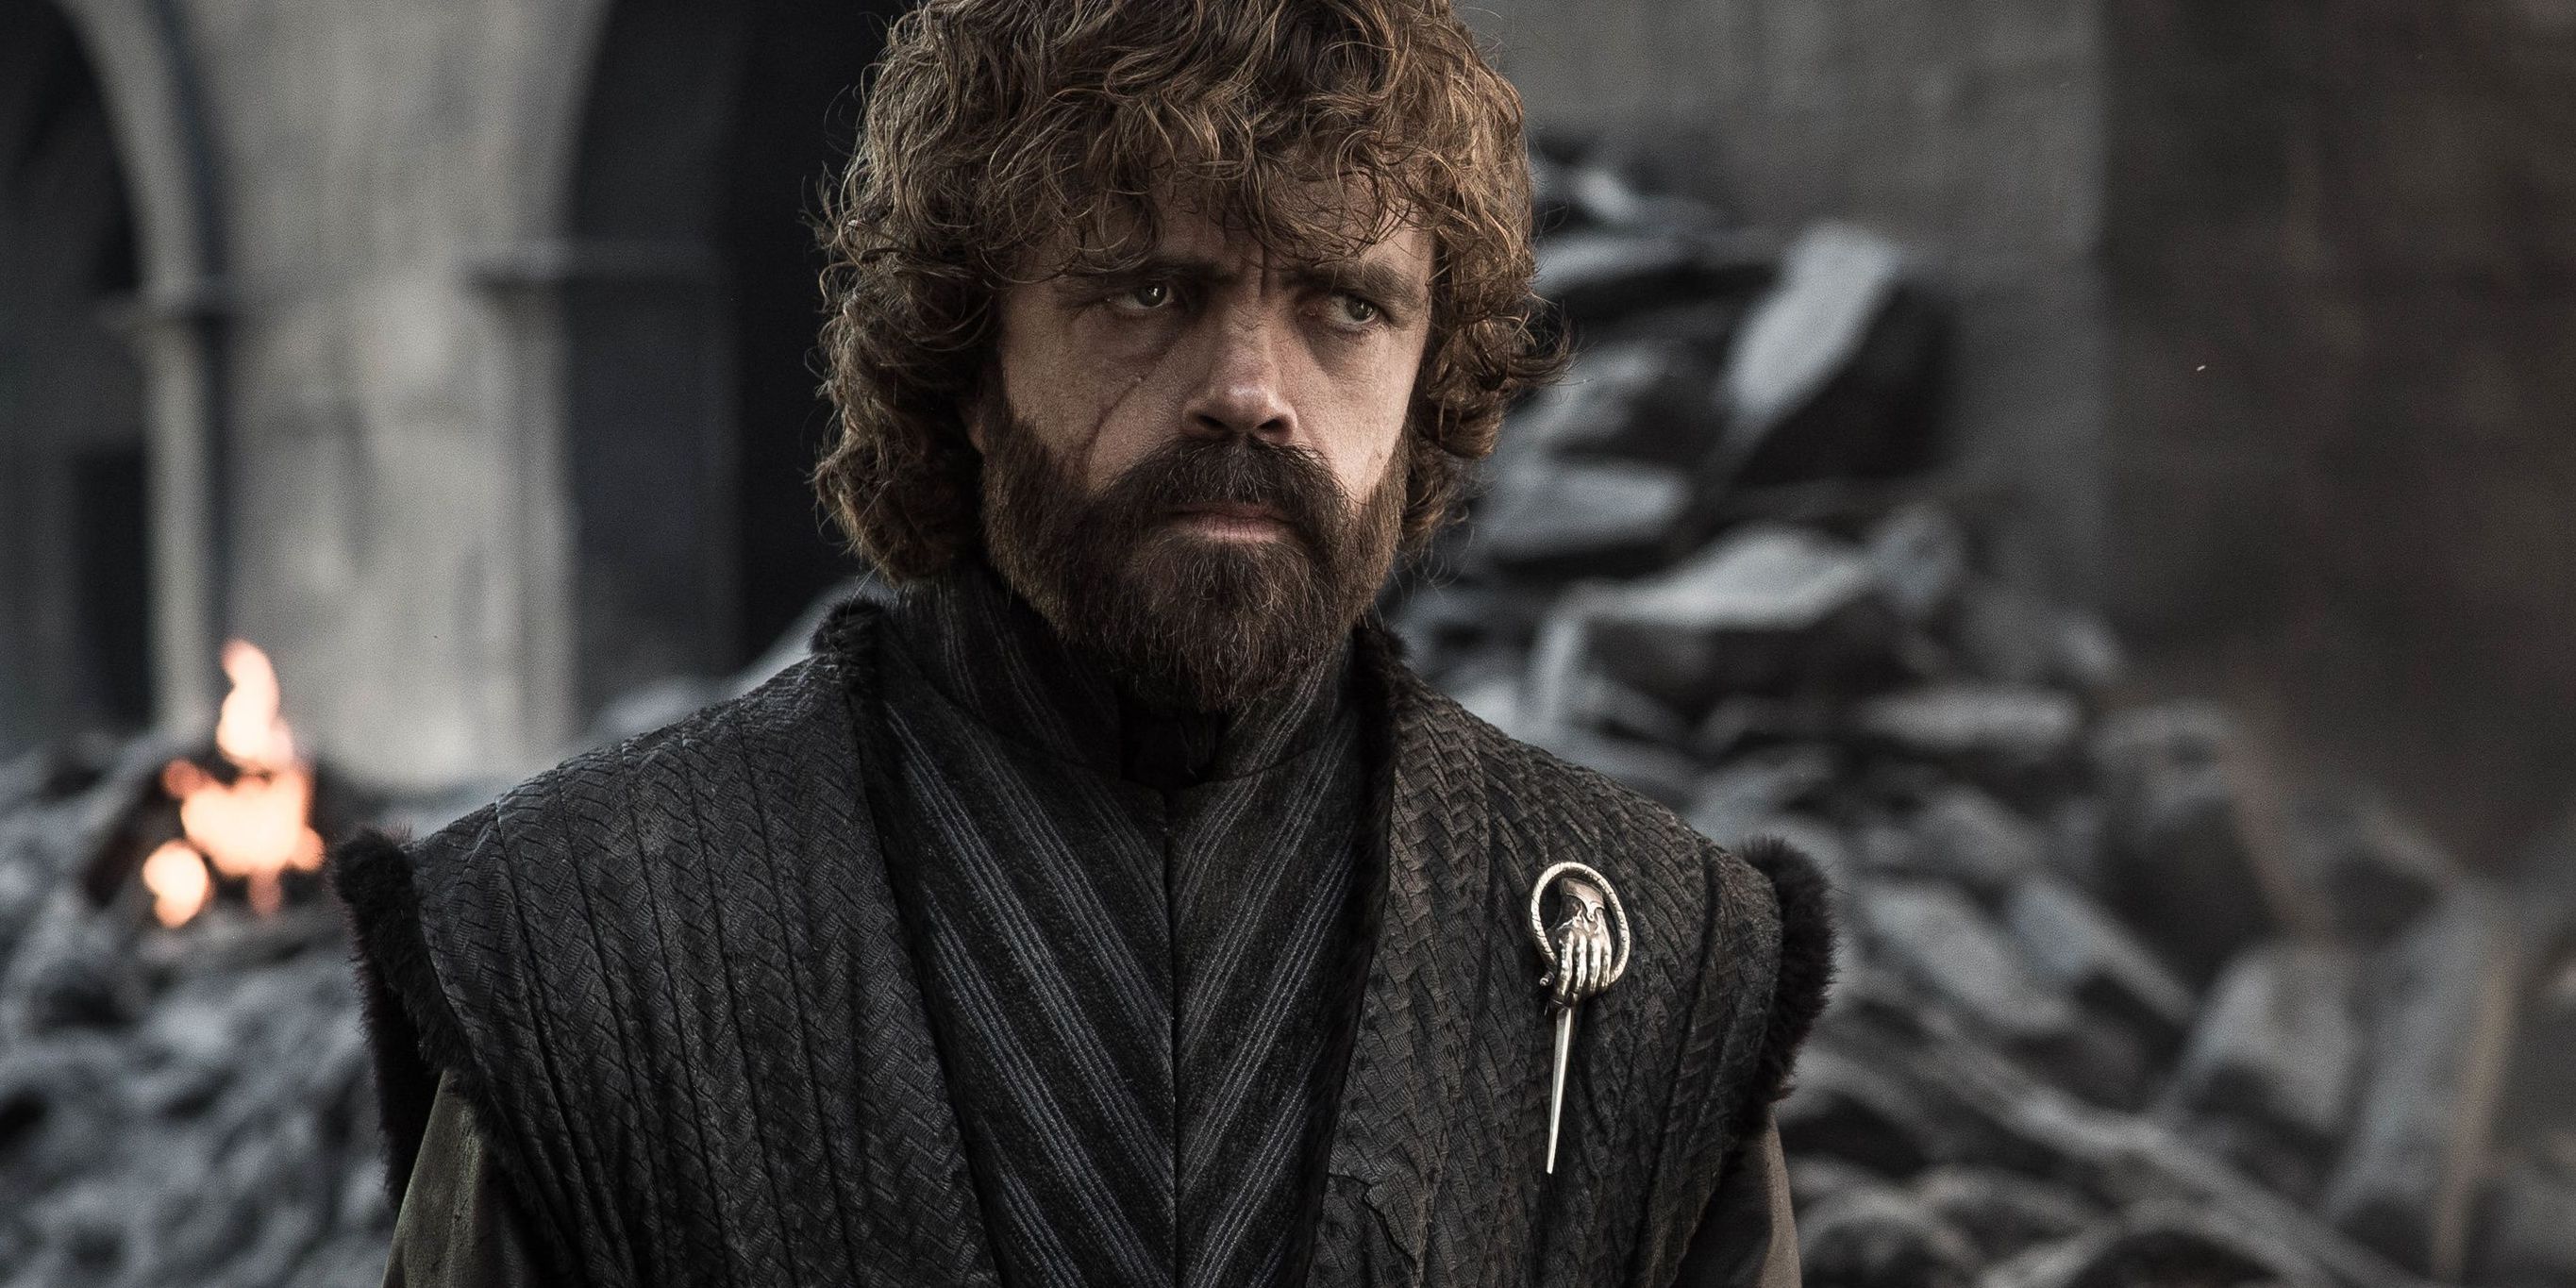 Tyrion Lannister as Hna dof The King